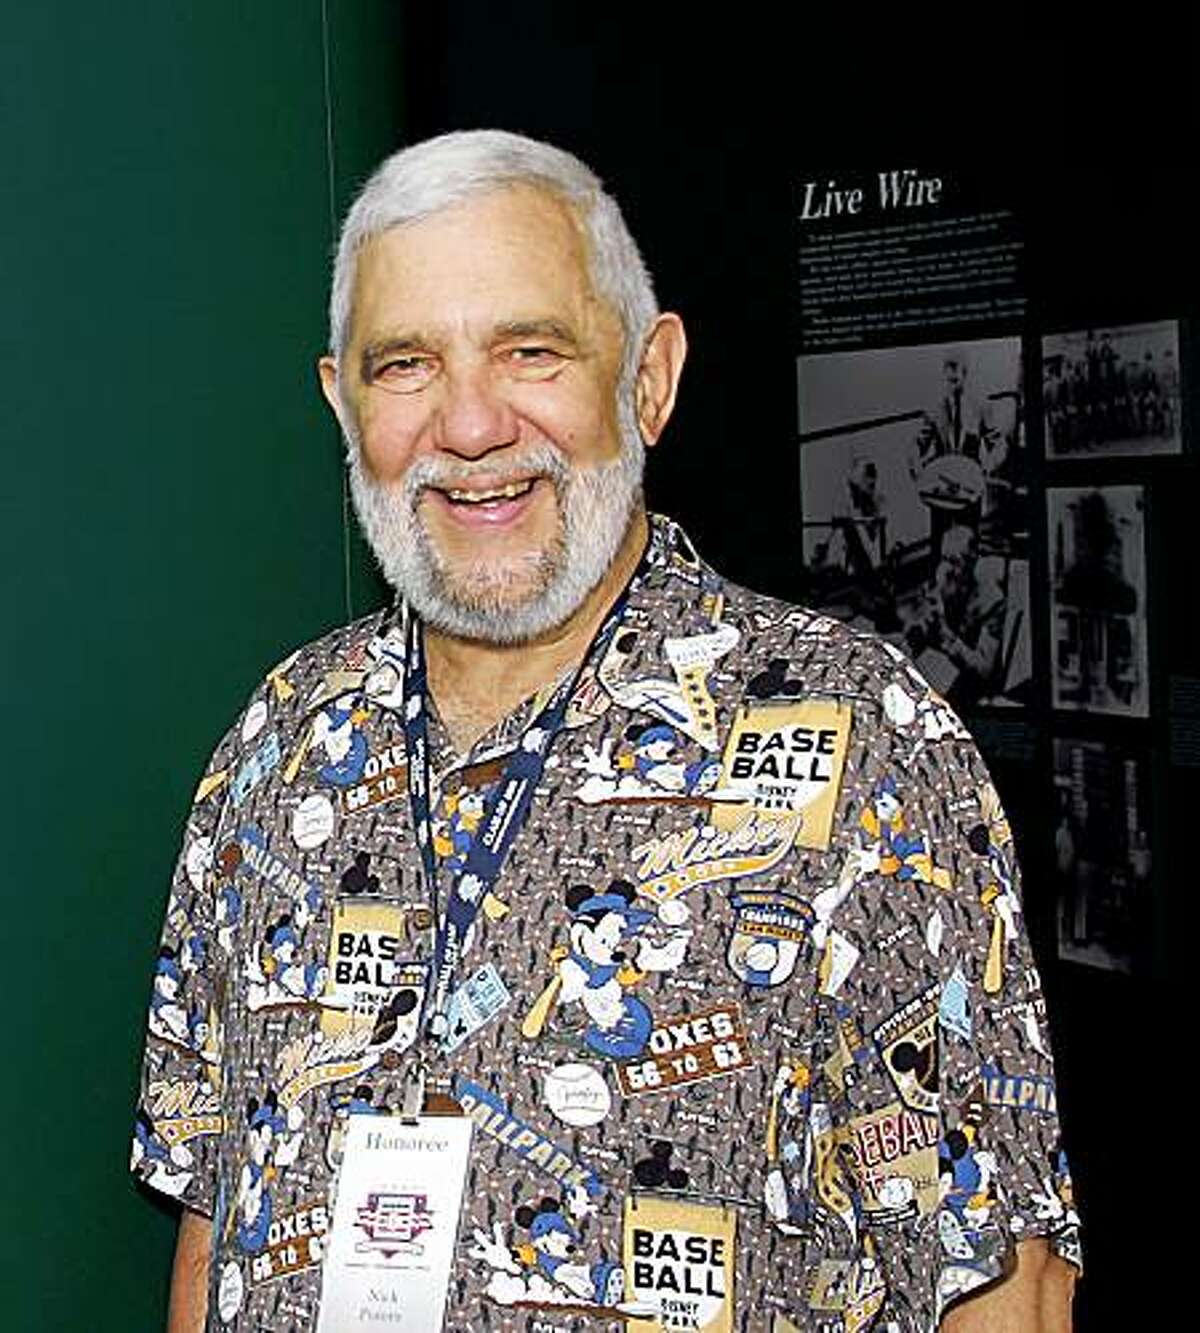 Nick Peters standing in front of the entryway at the Baseball Writers exhibit at the Museum .